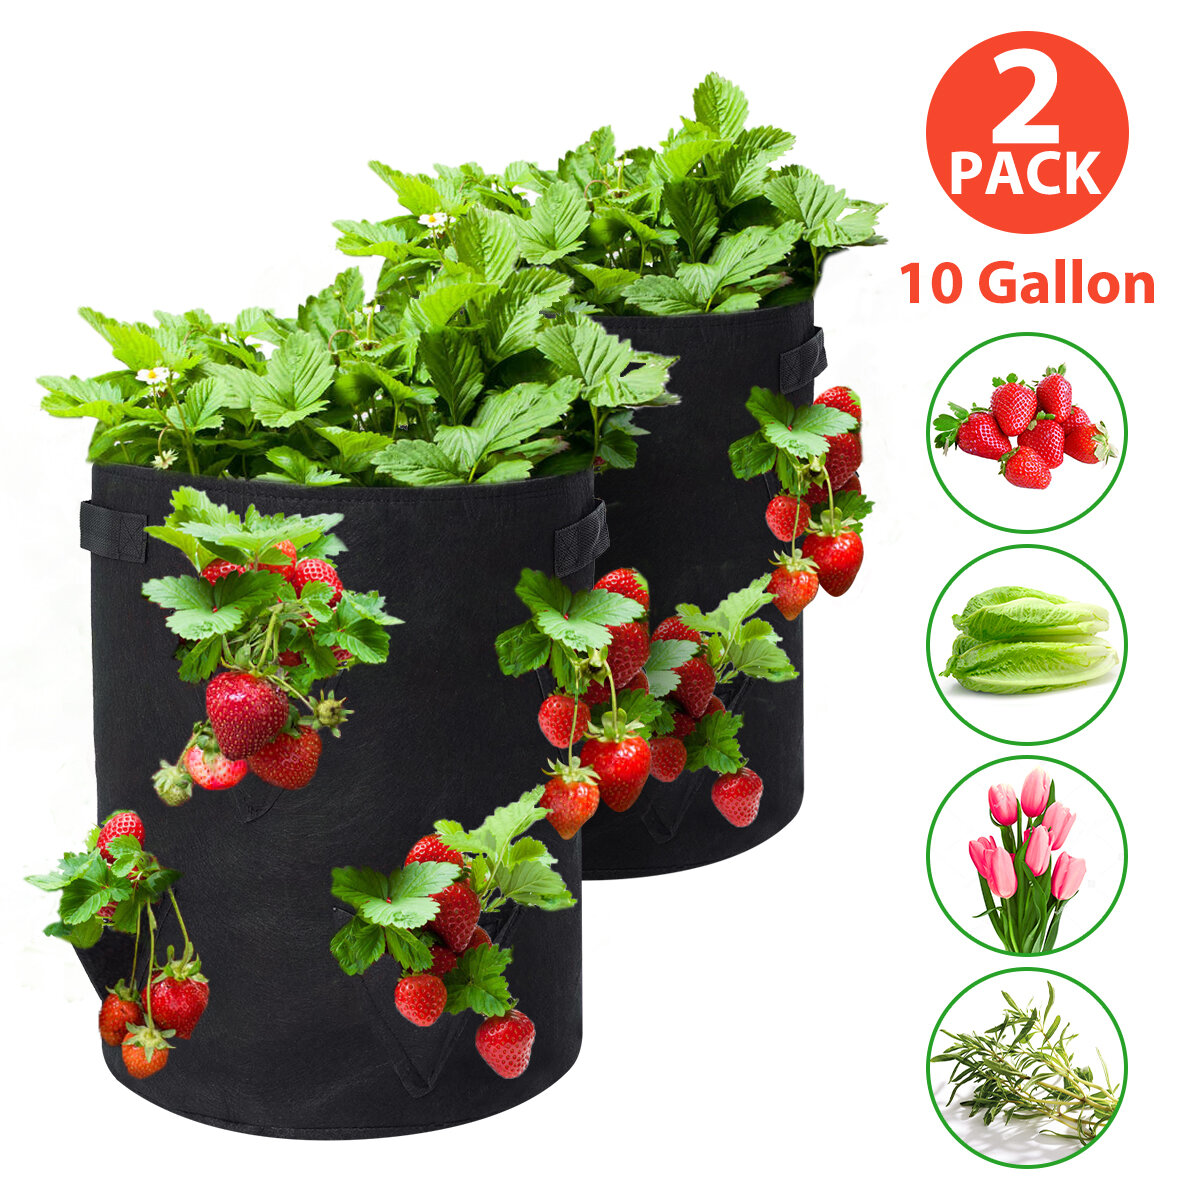 Tvird Strawberry Planting Bags 2 Pack 10 Gallon Planting Pouch Fabric Pots Premium Breathable Cloth Bags